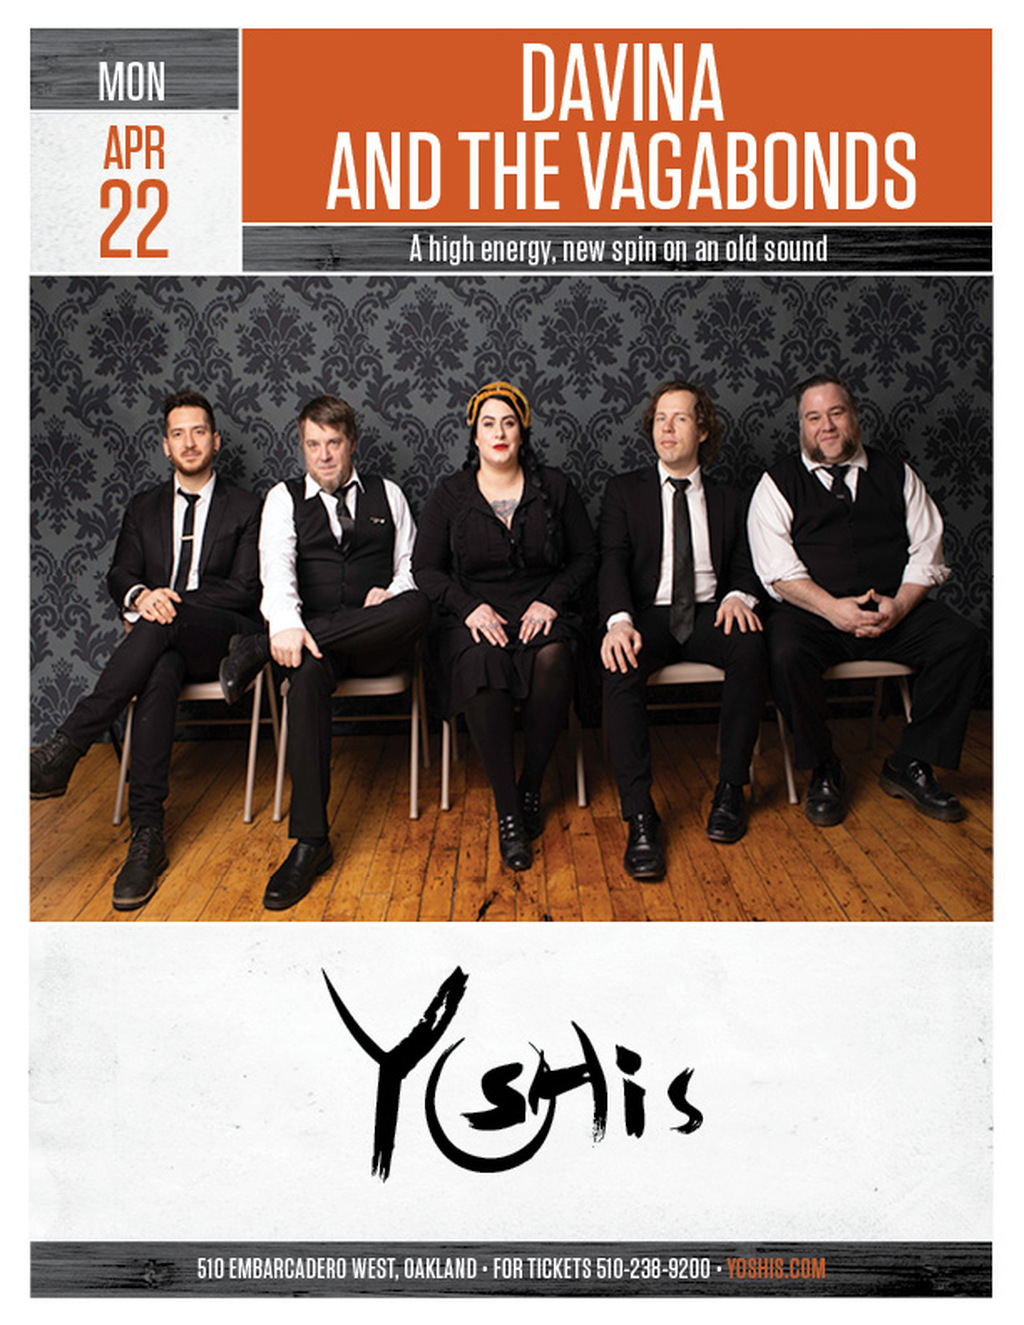 Yoshi s Bolden Your Night with MON DAVINA APR AND THE VAGABONDS at Yoshi s promotion flier on Digifli com